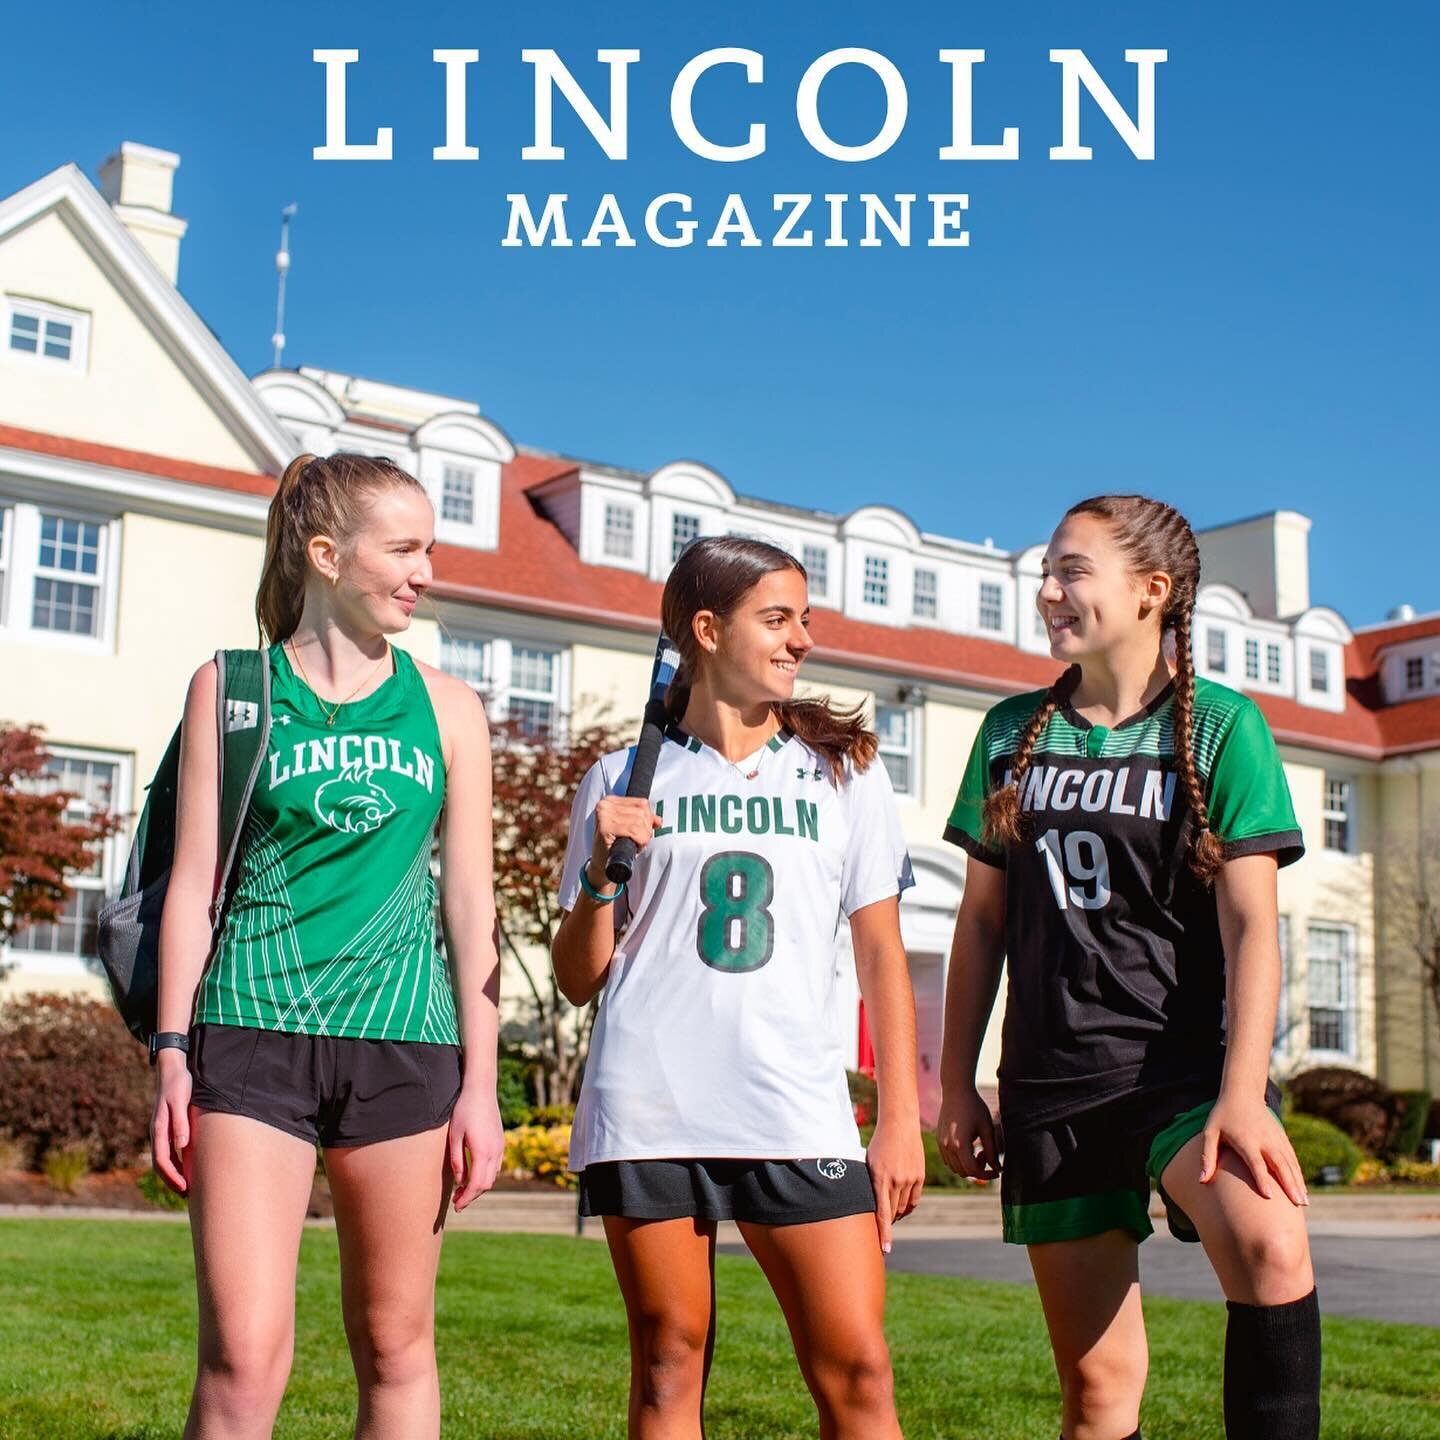 Issue #4 for @lincoln1884 ! Full of inspiring stories, strong women, and gorgeous photography by Brittany Taylor.